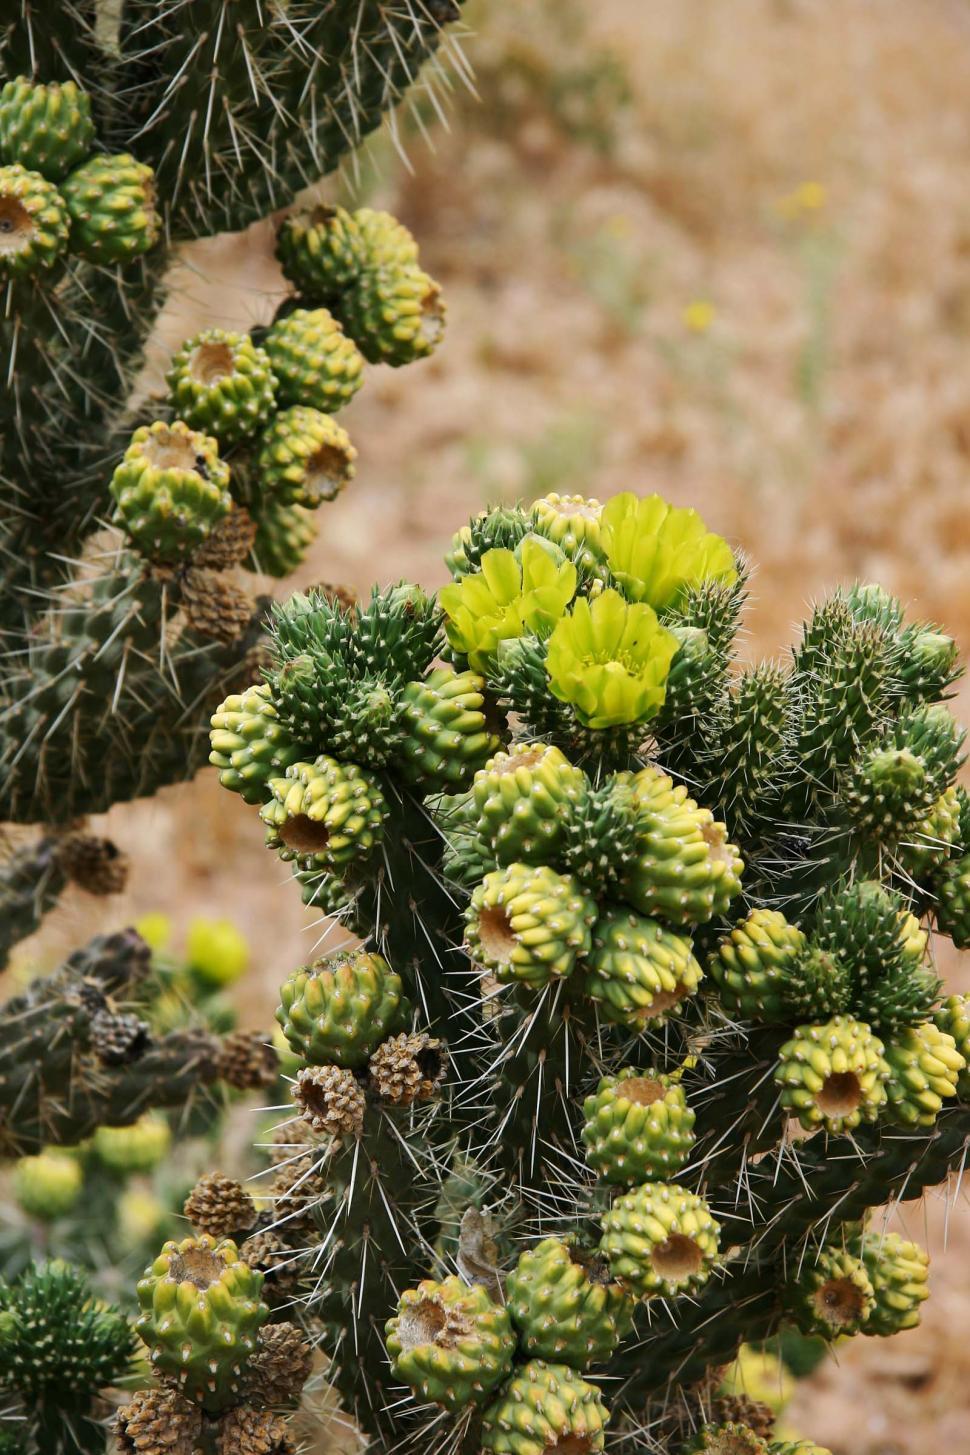 Free Image of Cactus With Yellow Flowers in Desert 